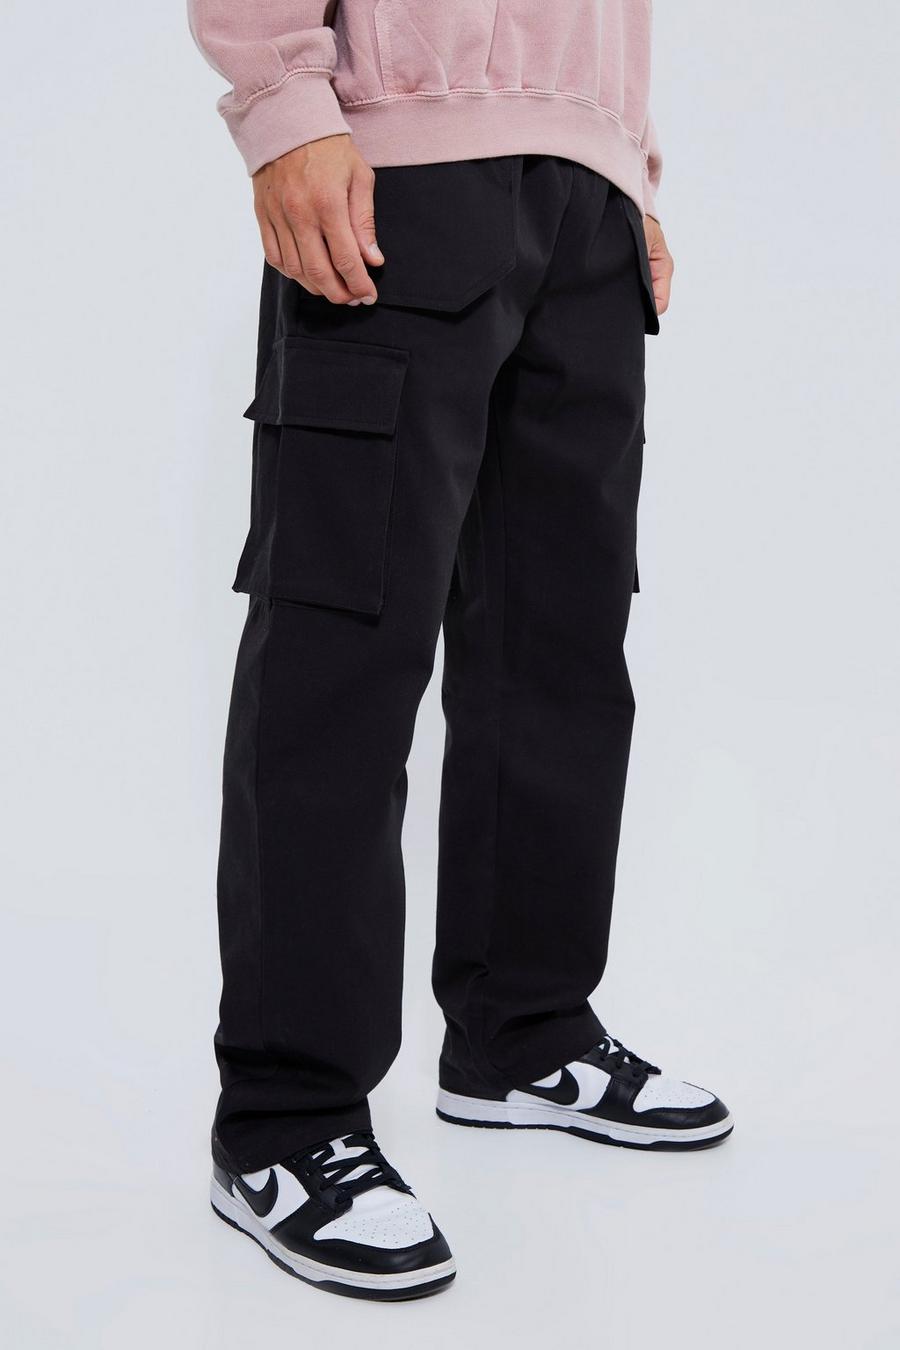 Black Elastic Waist Relaxed Fit Buckle Cargo Jogger